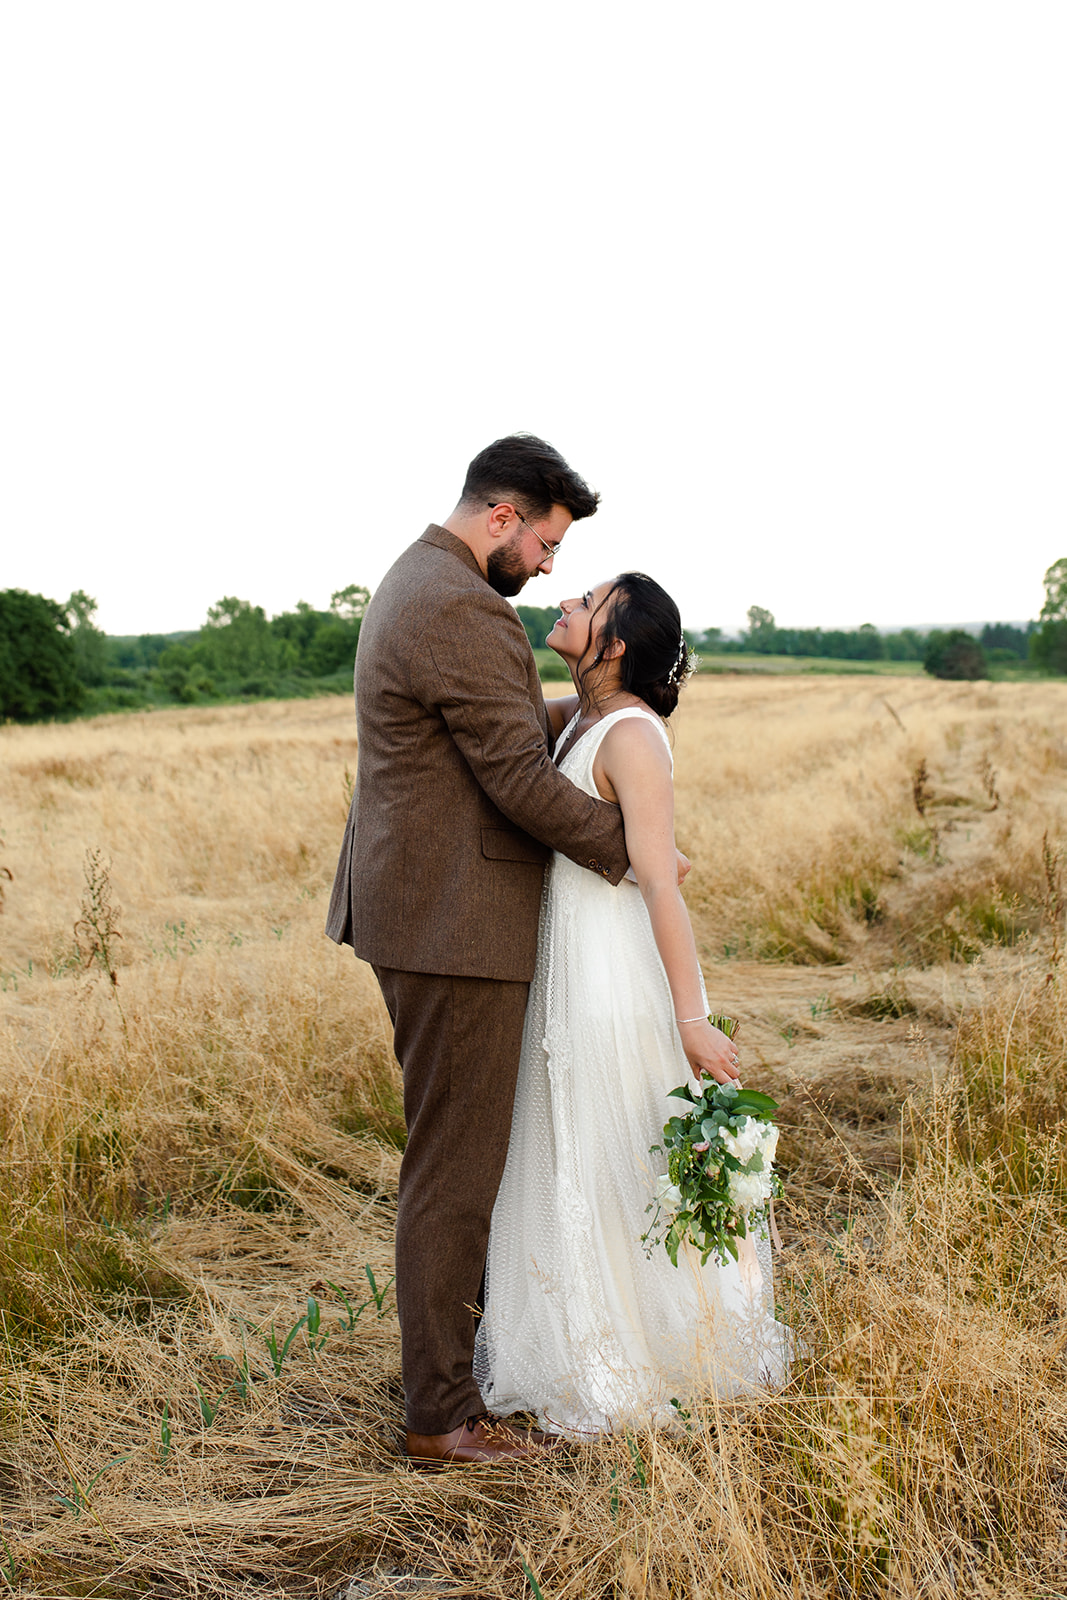 Majestic wedding photos in a wheat field during a beautiful Ohio sunset